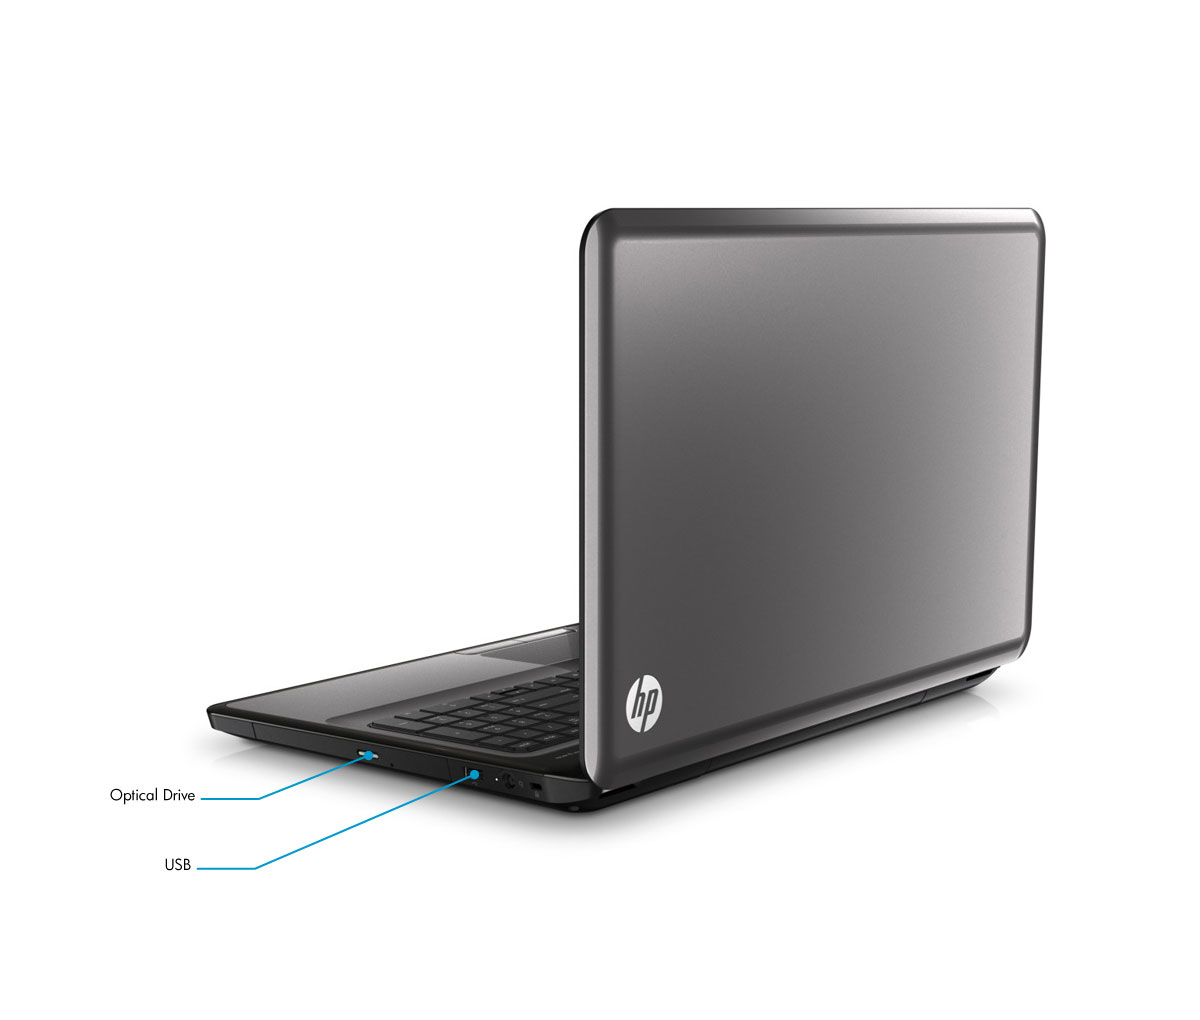 HP Pavilion g7-1272nr Notebook PC Right View